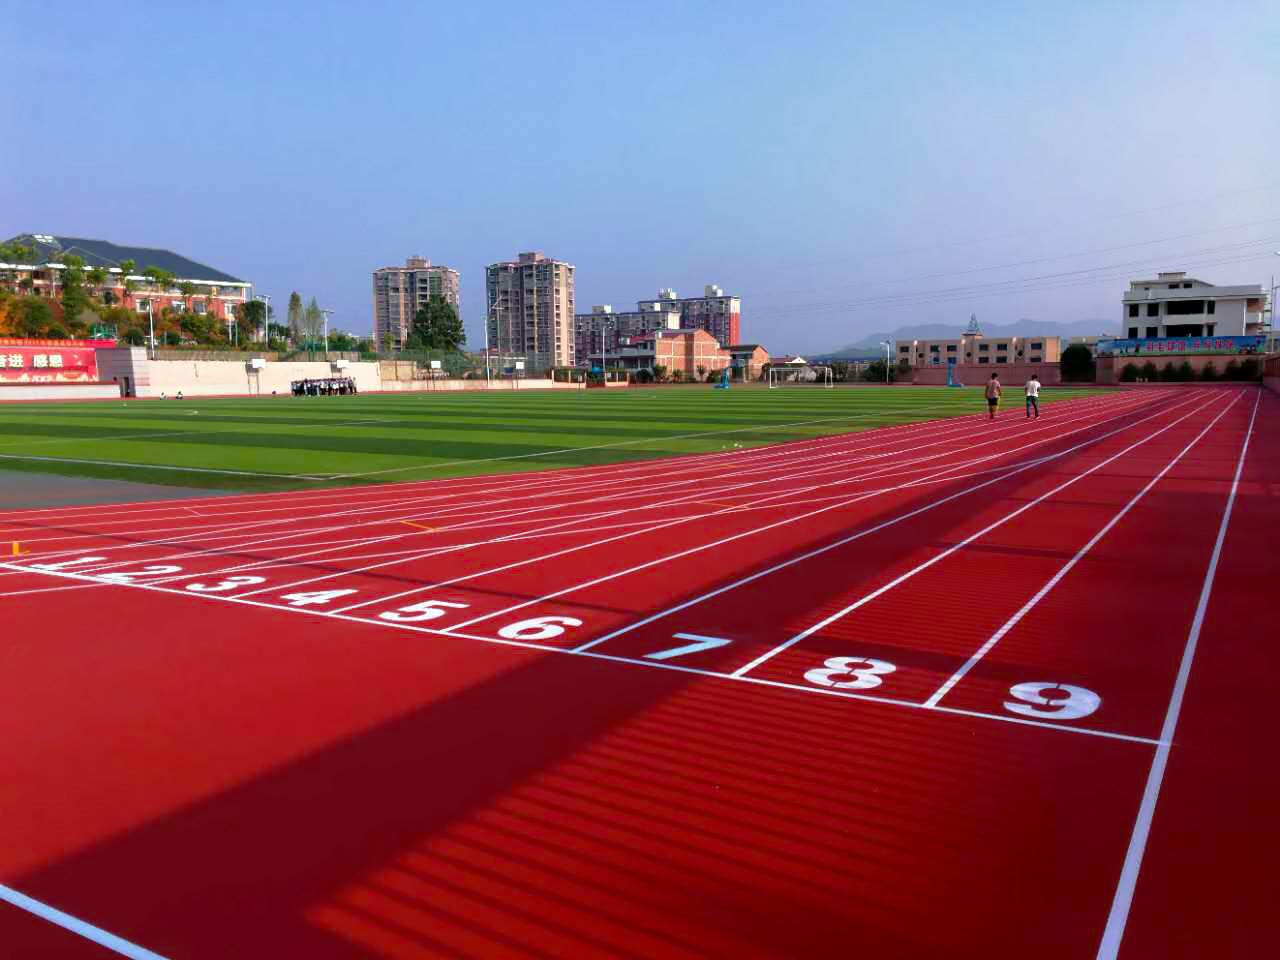 Prefabricated rubber running track  rolls,Olympic Intercontinental Games,Track and field sports training venues